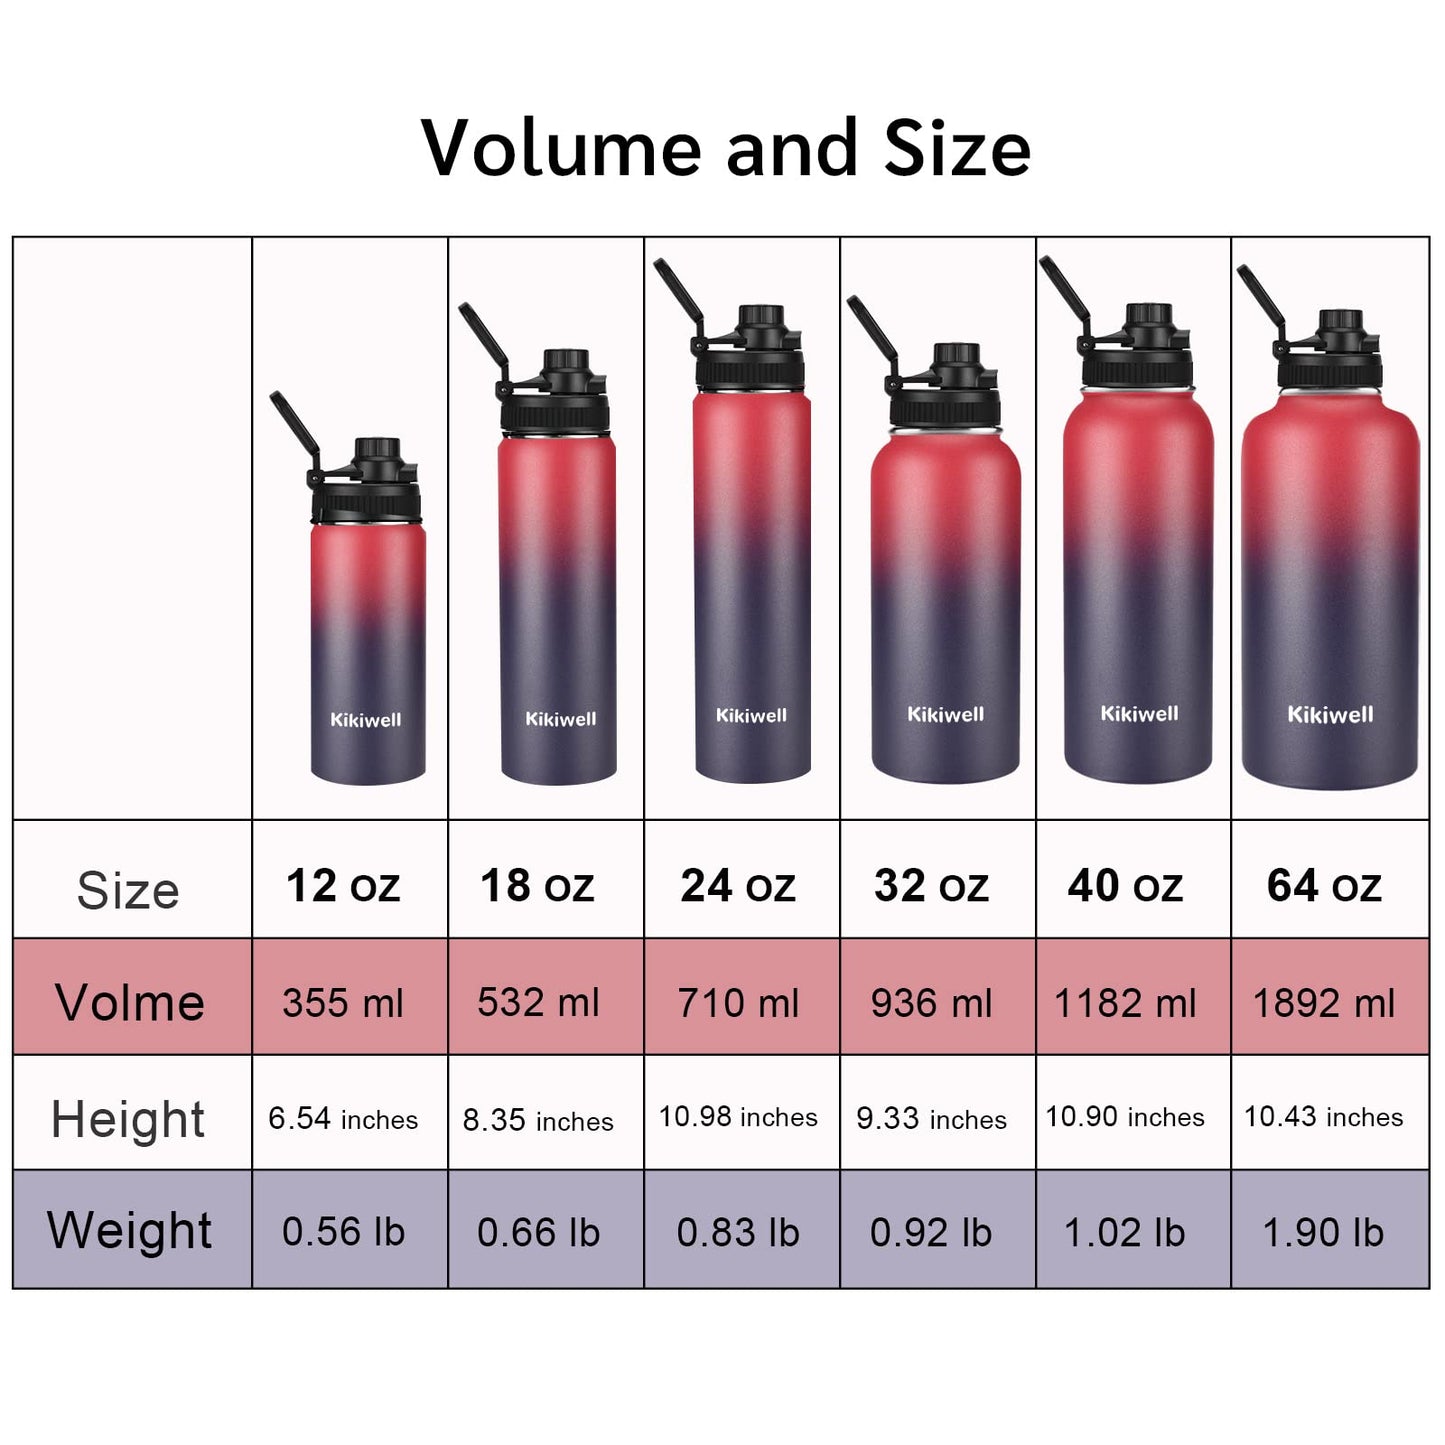 Insulated Water Bottle With Straw, Sports Water Bottle 1L, Reusable Vacuum 18/8 Stainless Steel Flask Thermos, Modern Wide Mouth Double Walled Simple Mug, Keeps Hot & Cold (32 oz, Wine Red Deep Sea)